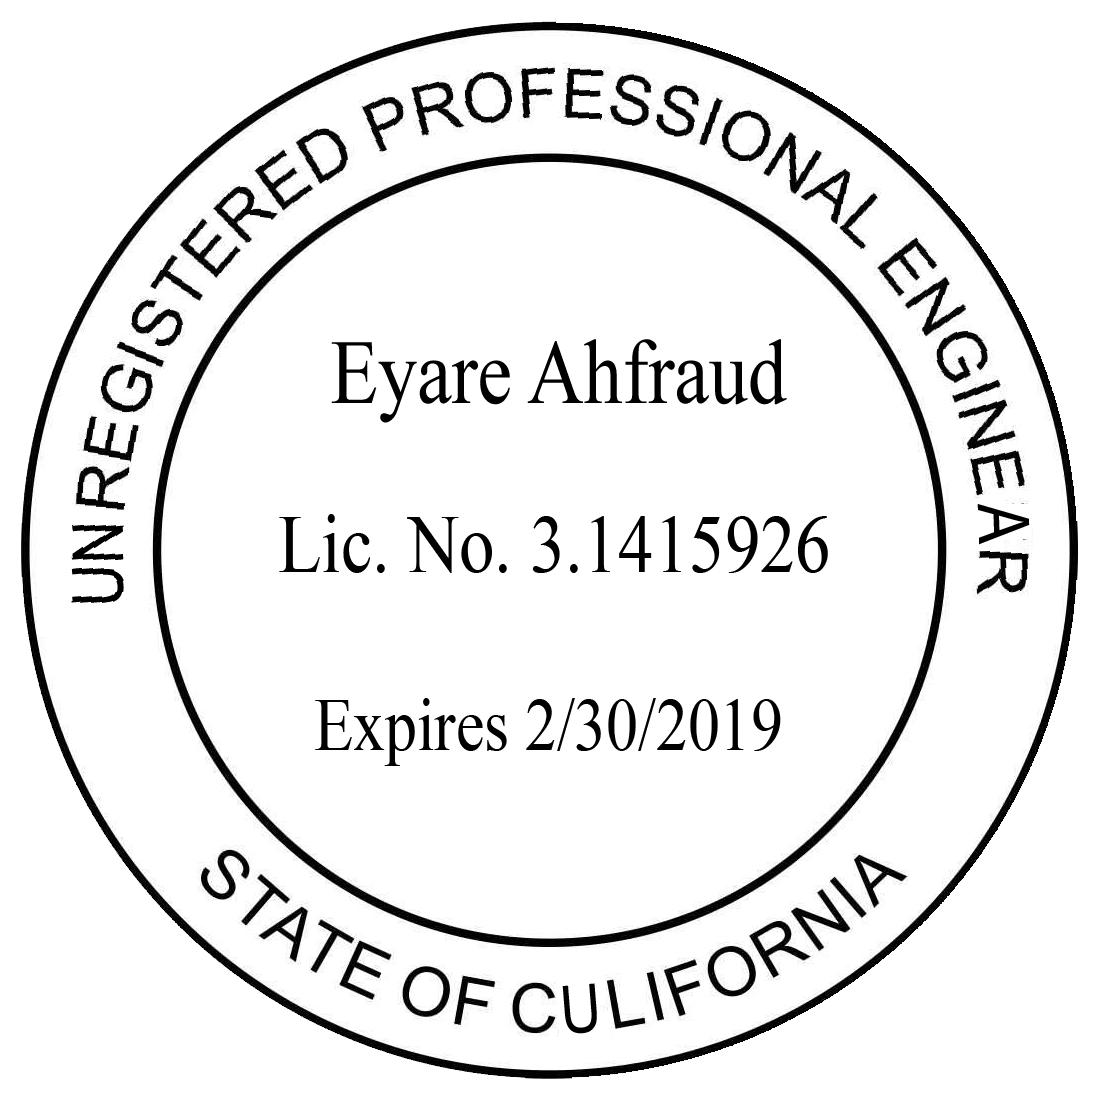 engineering approval stamp